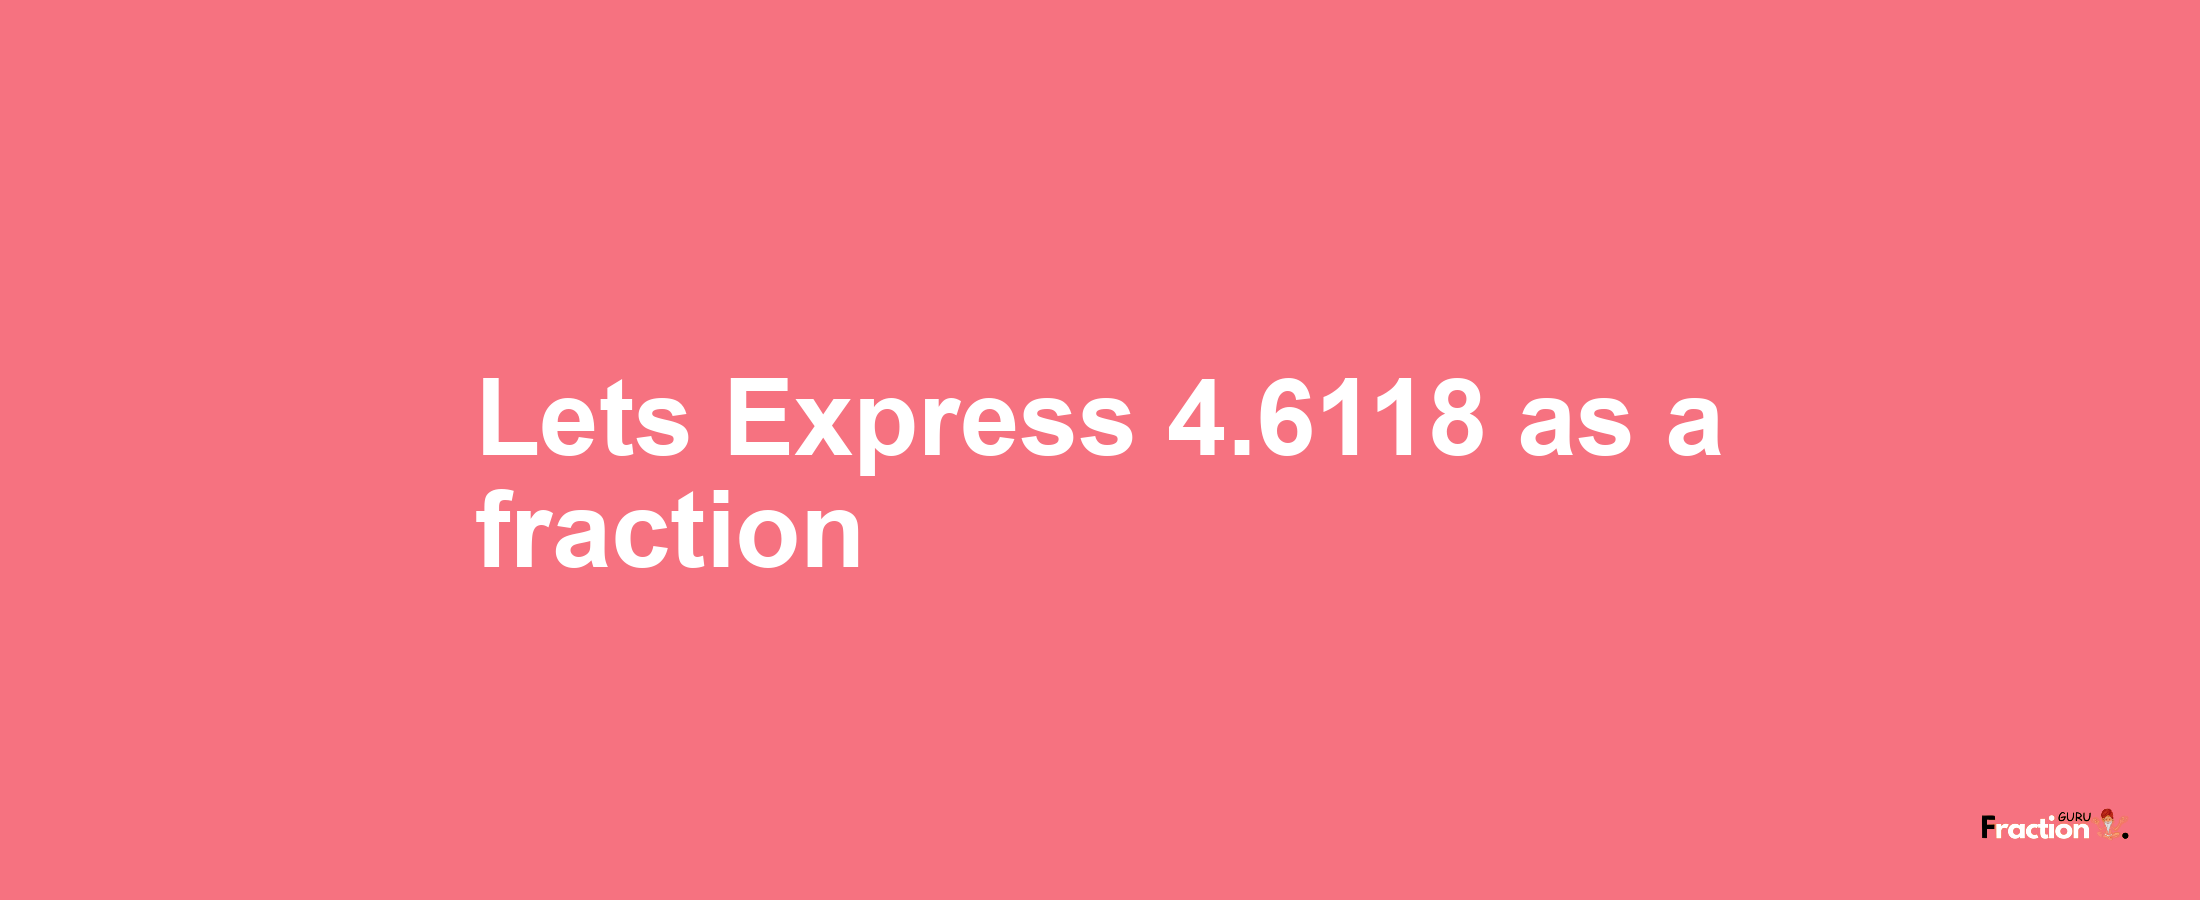 Lets Express 4.6118 as afraction